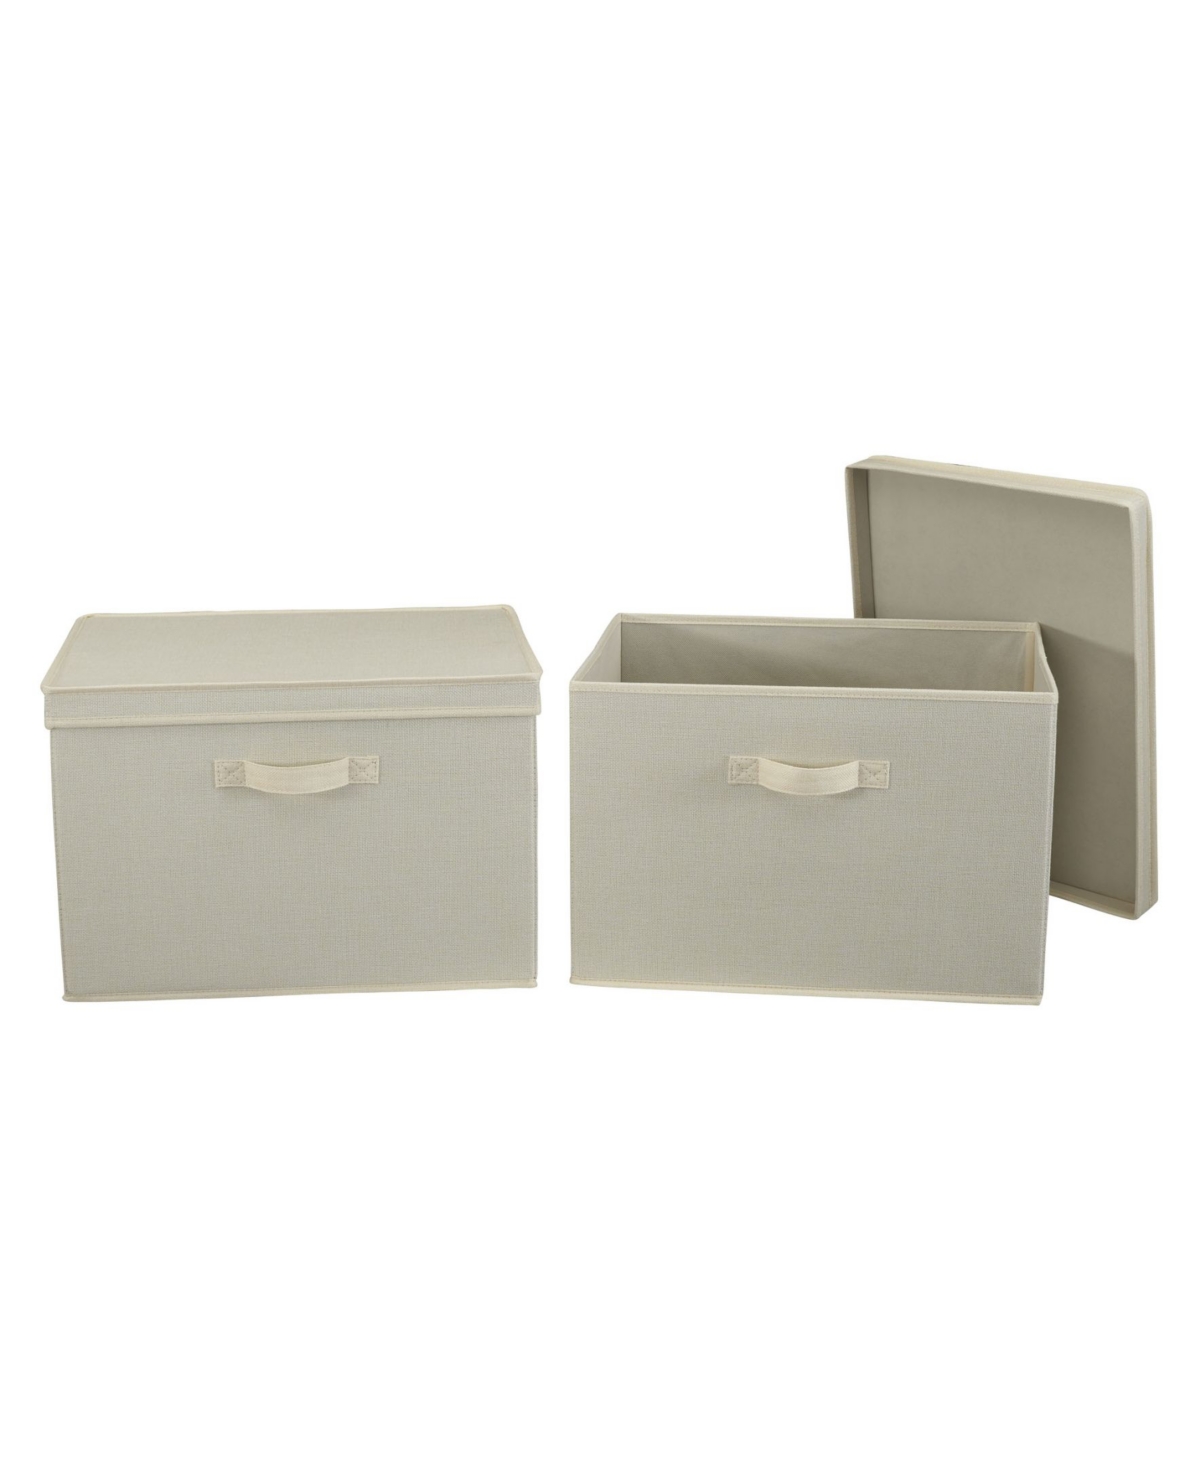 HOUSEHOLD ESSENTIALS WIDE STORAGE BOX WITH LID BOX, SET OF 2